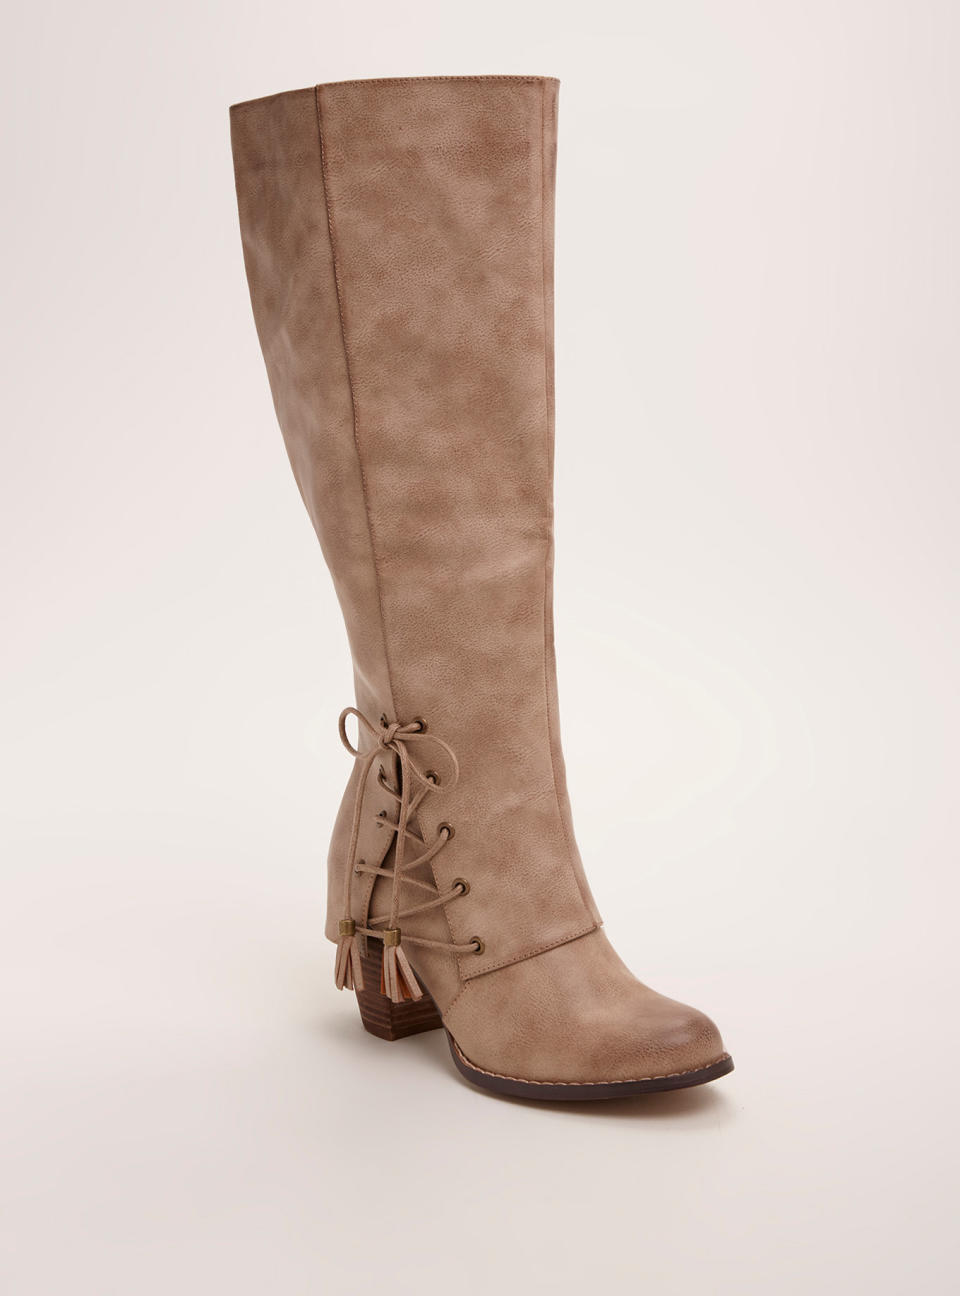 <a href="http://www.torrid.com/product/lace-up-knee-high-heel-boots-wide-width-wide-calf/10965582.html?cgid=shoes-boots" target="_blank">Shop them here</a>.&nbsp;